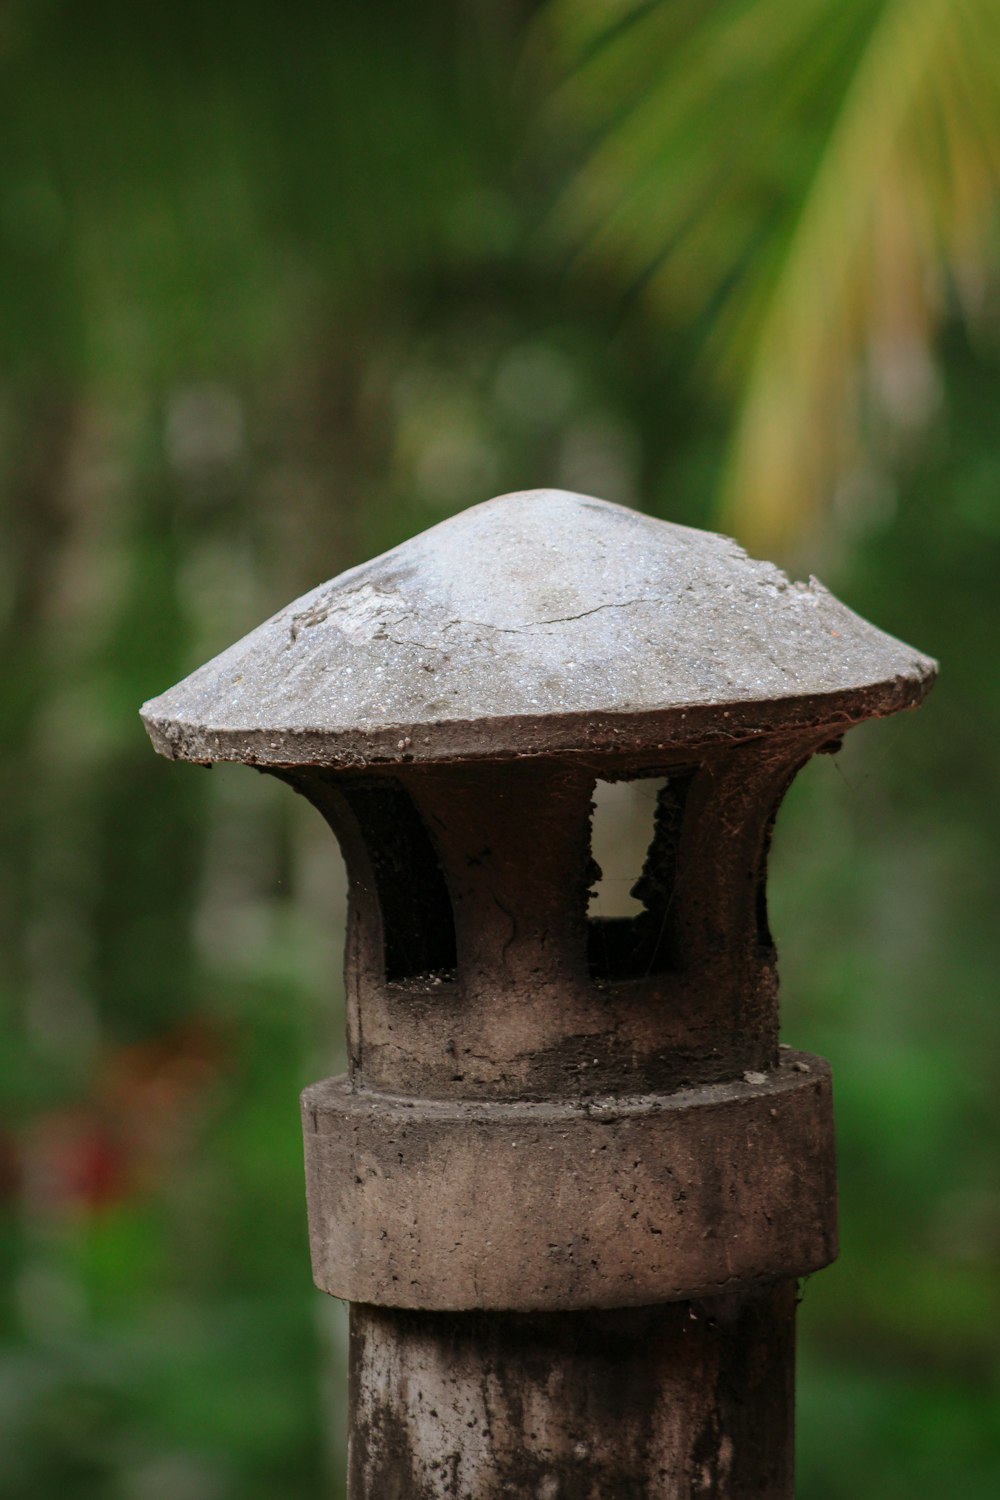 a close up of a metal object with trees in the background